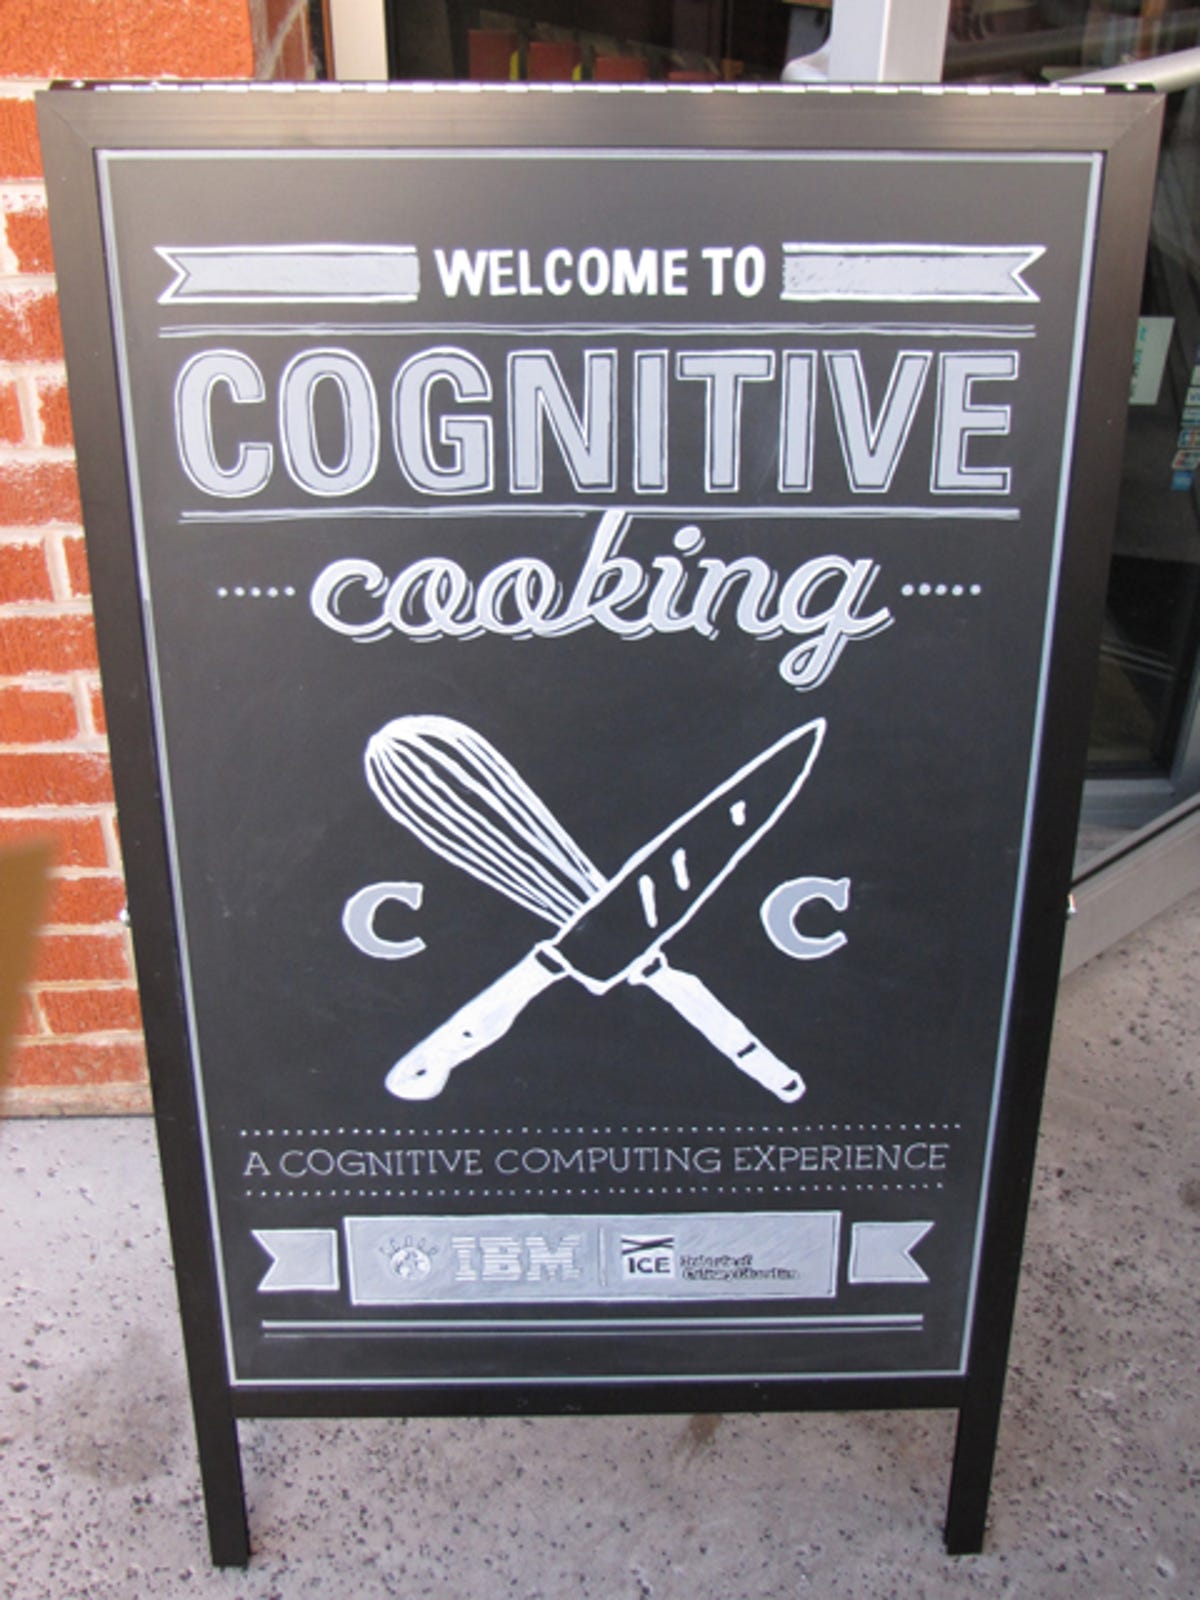 welcome-to-cognitive-cooking.jpg